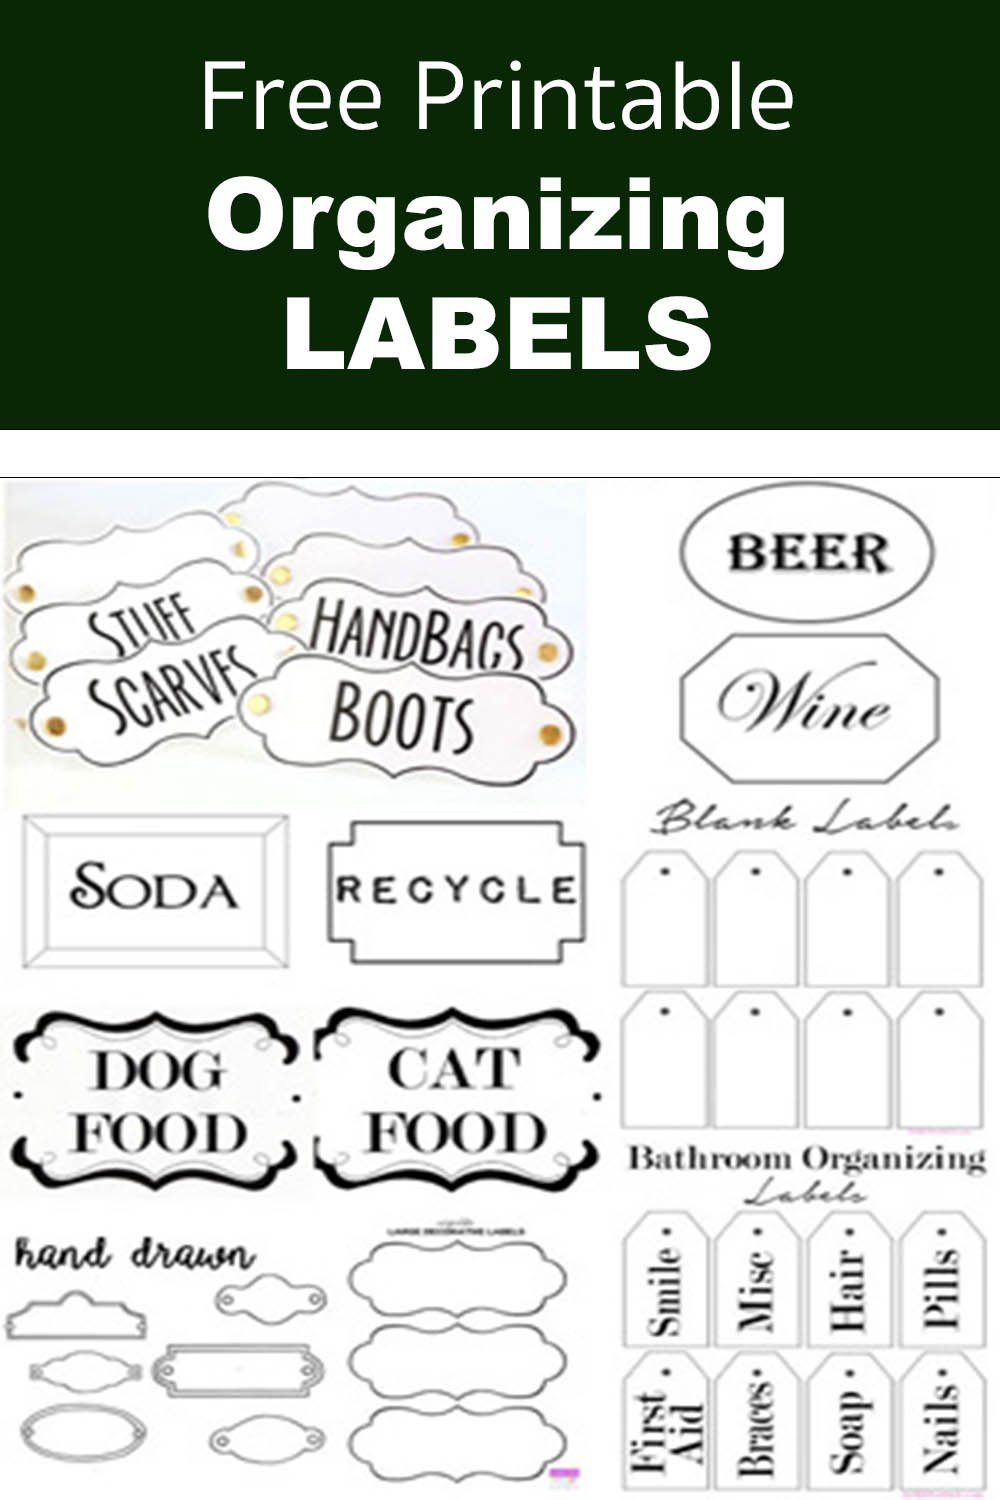 Free Printable Labels To Organize Your Stuff - In My Own Style throughout Free Printable Labels for Storage Bins